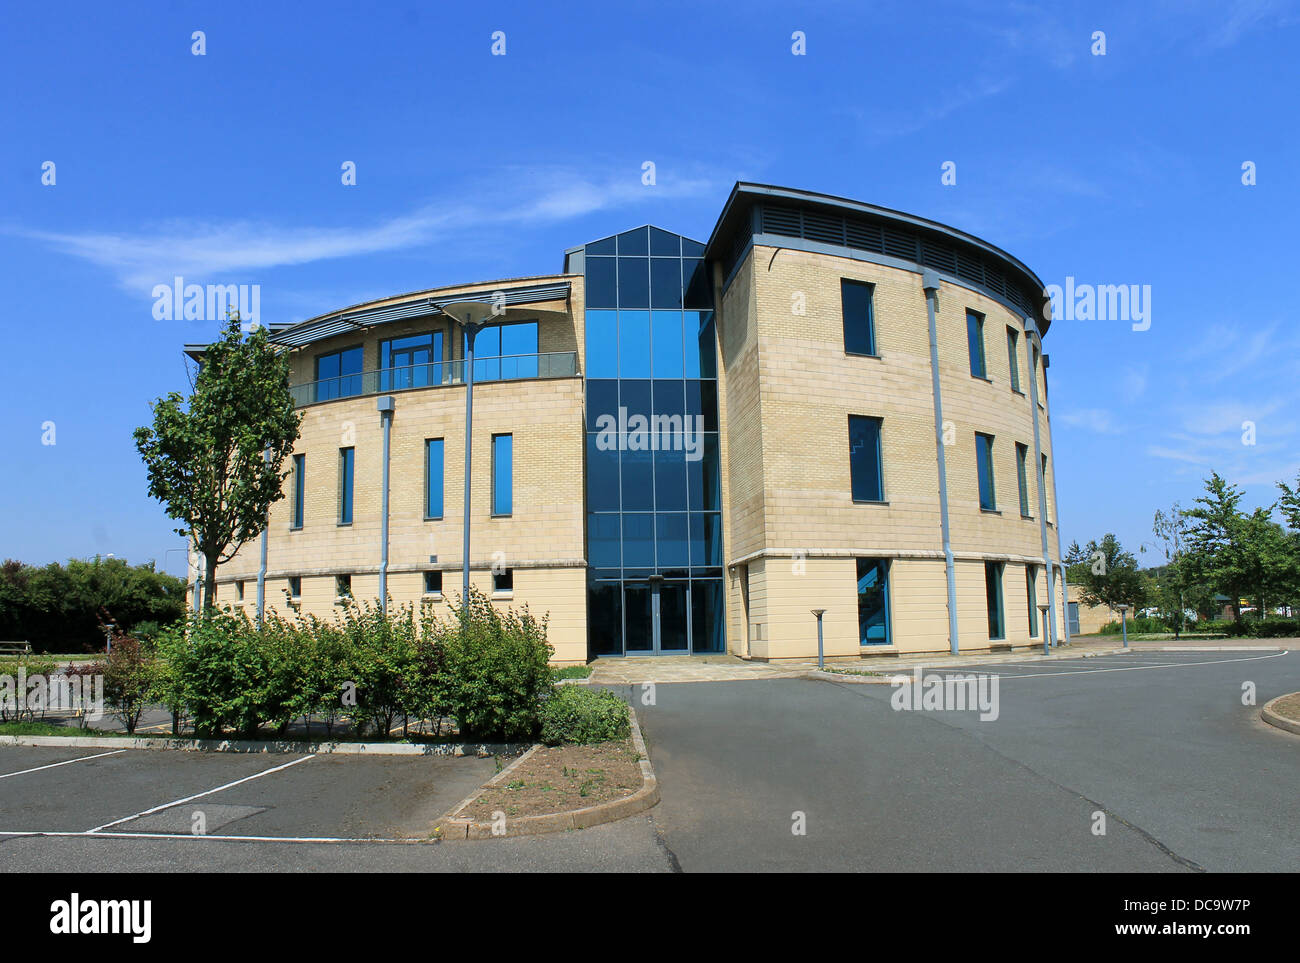 Exterior of empty modern office building. Stock Photo